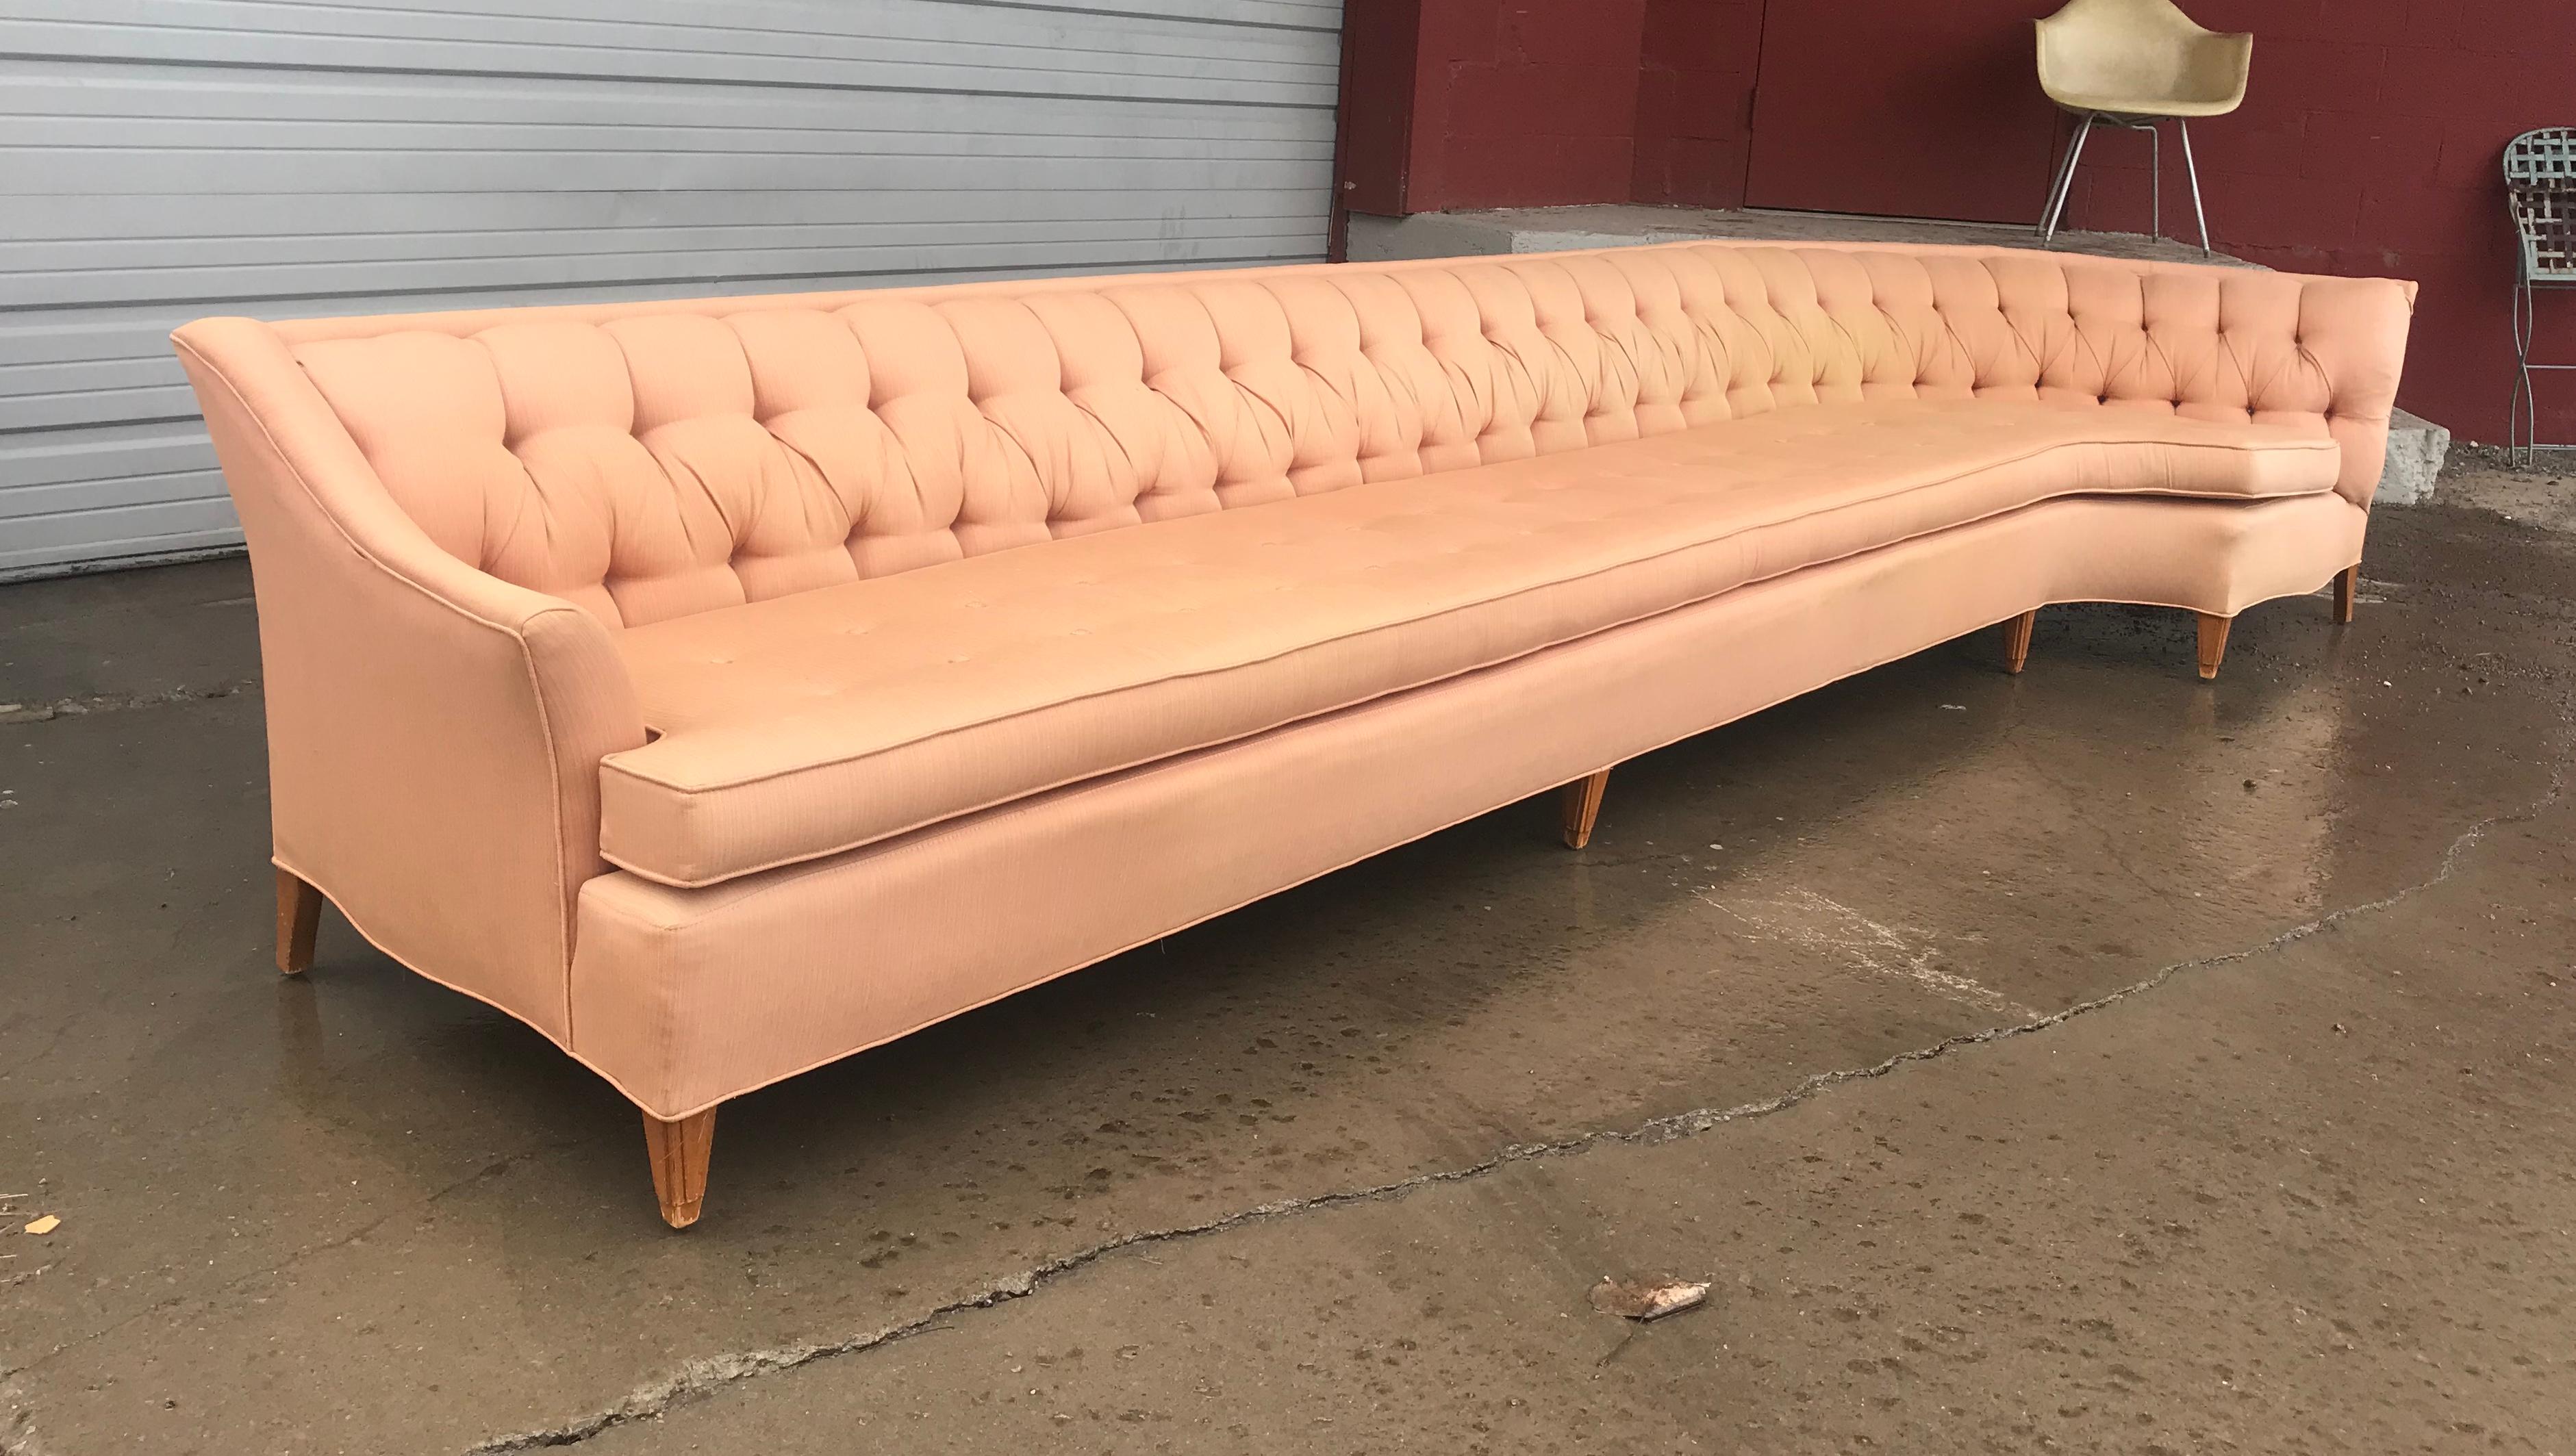 12 foot couch